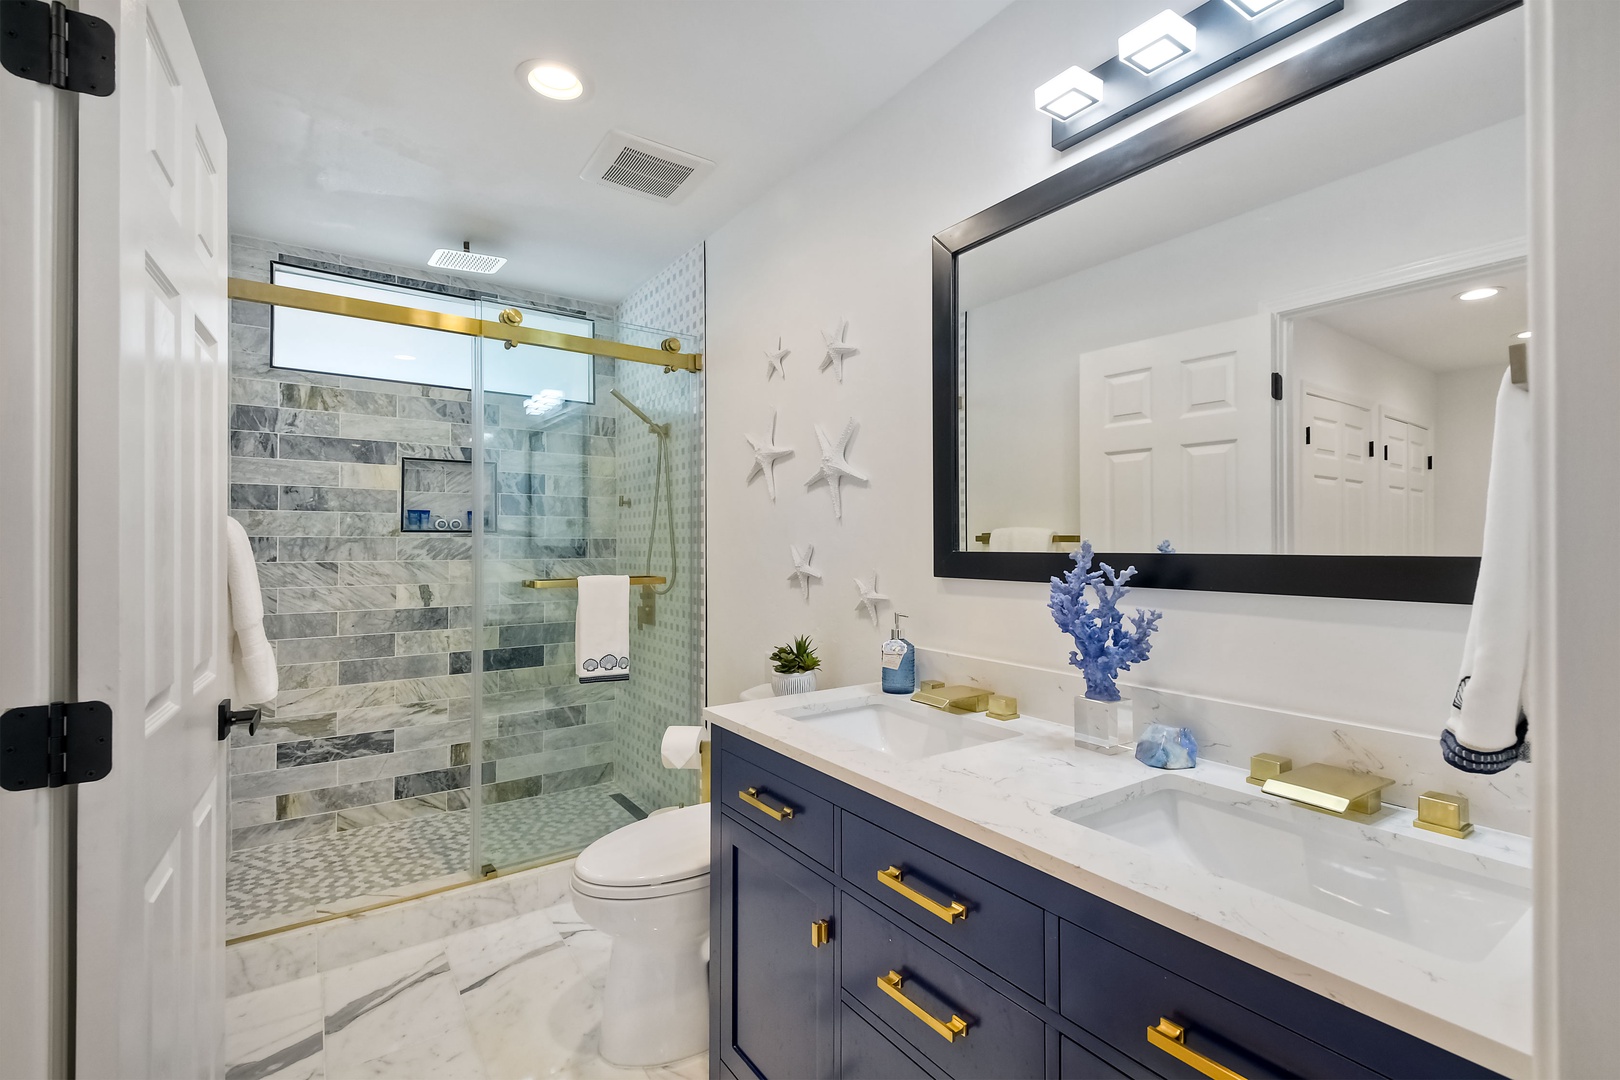 This gorgeous full bath includes a double vanity & luxurious glass shower